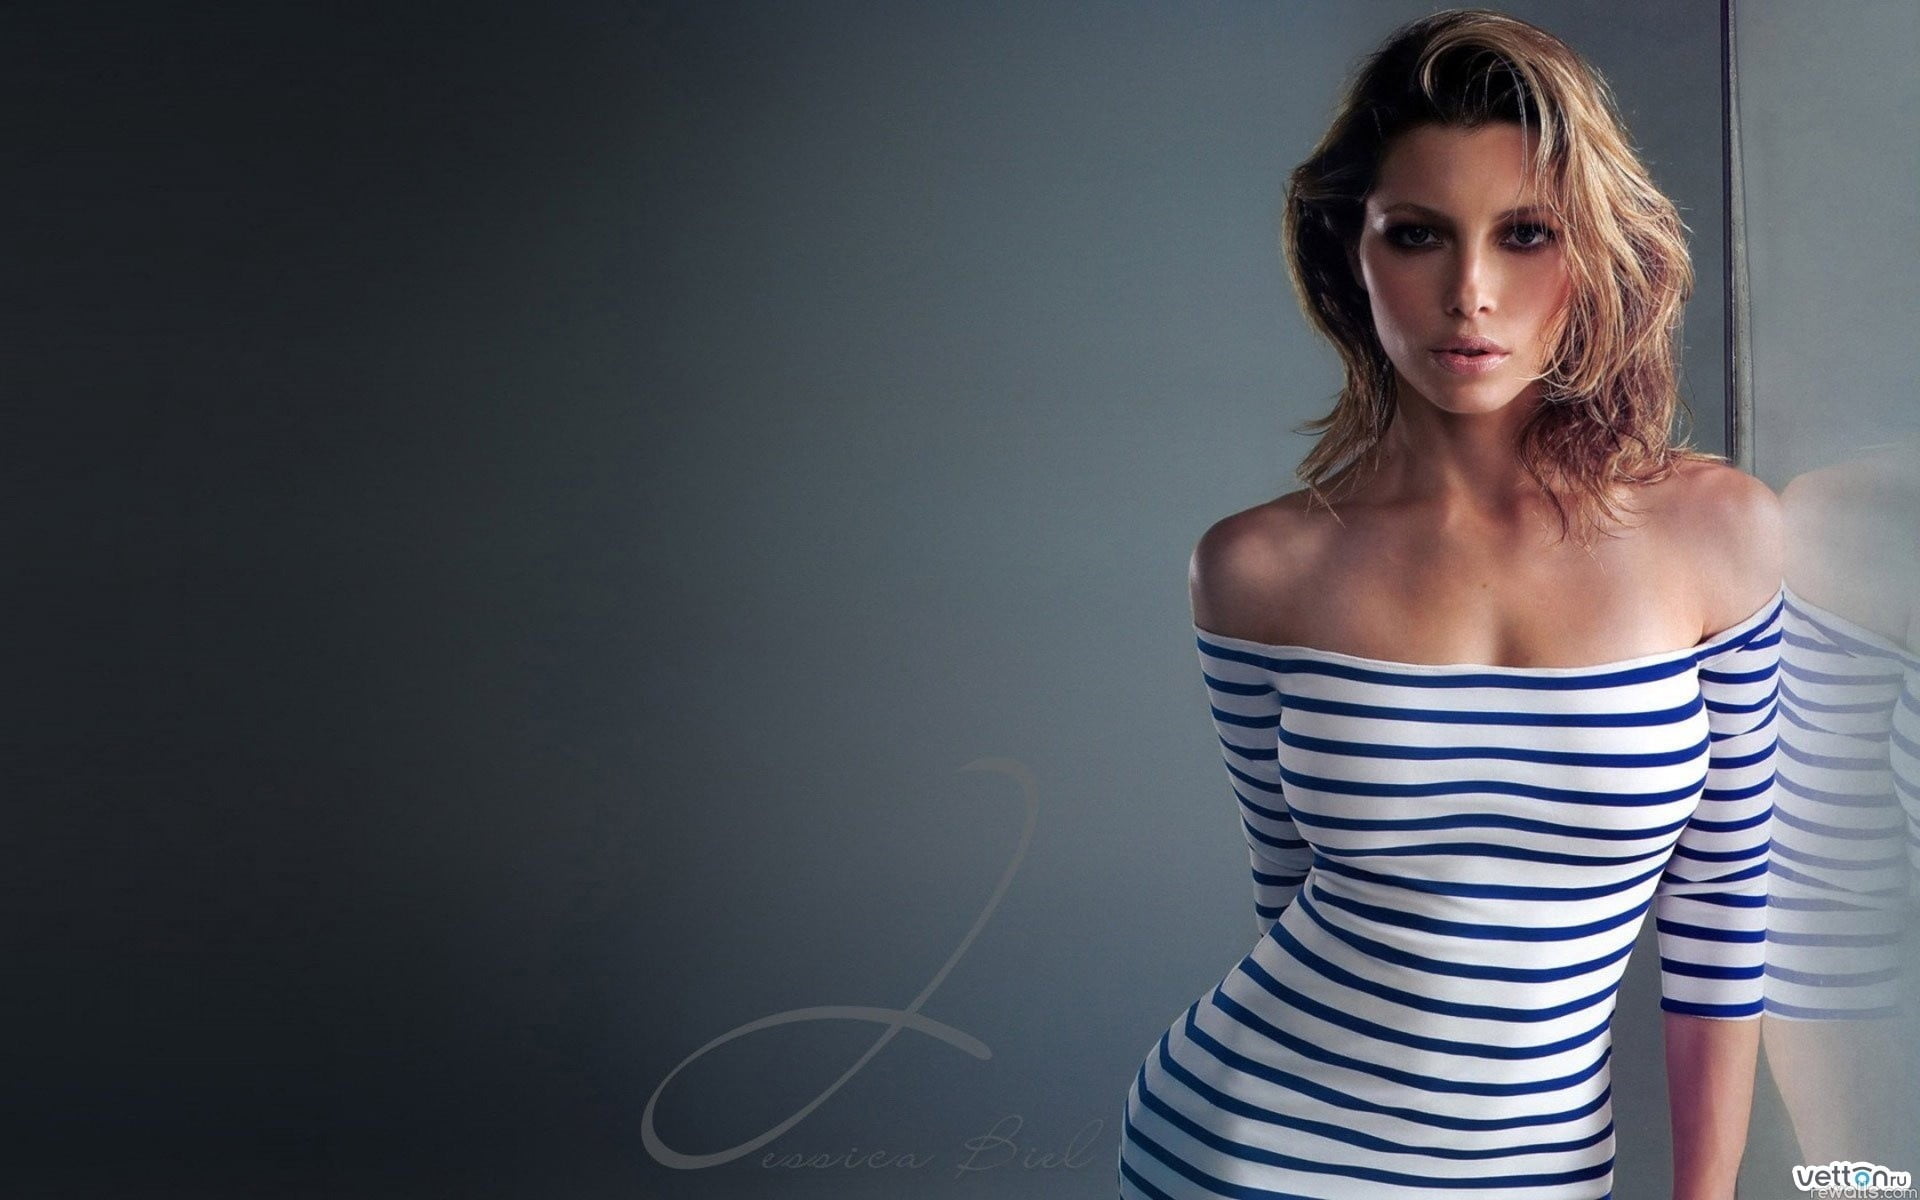 women's white and black striped off-shoulder top, Jessica Biel, striped clothing, bare shoulders, actress